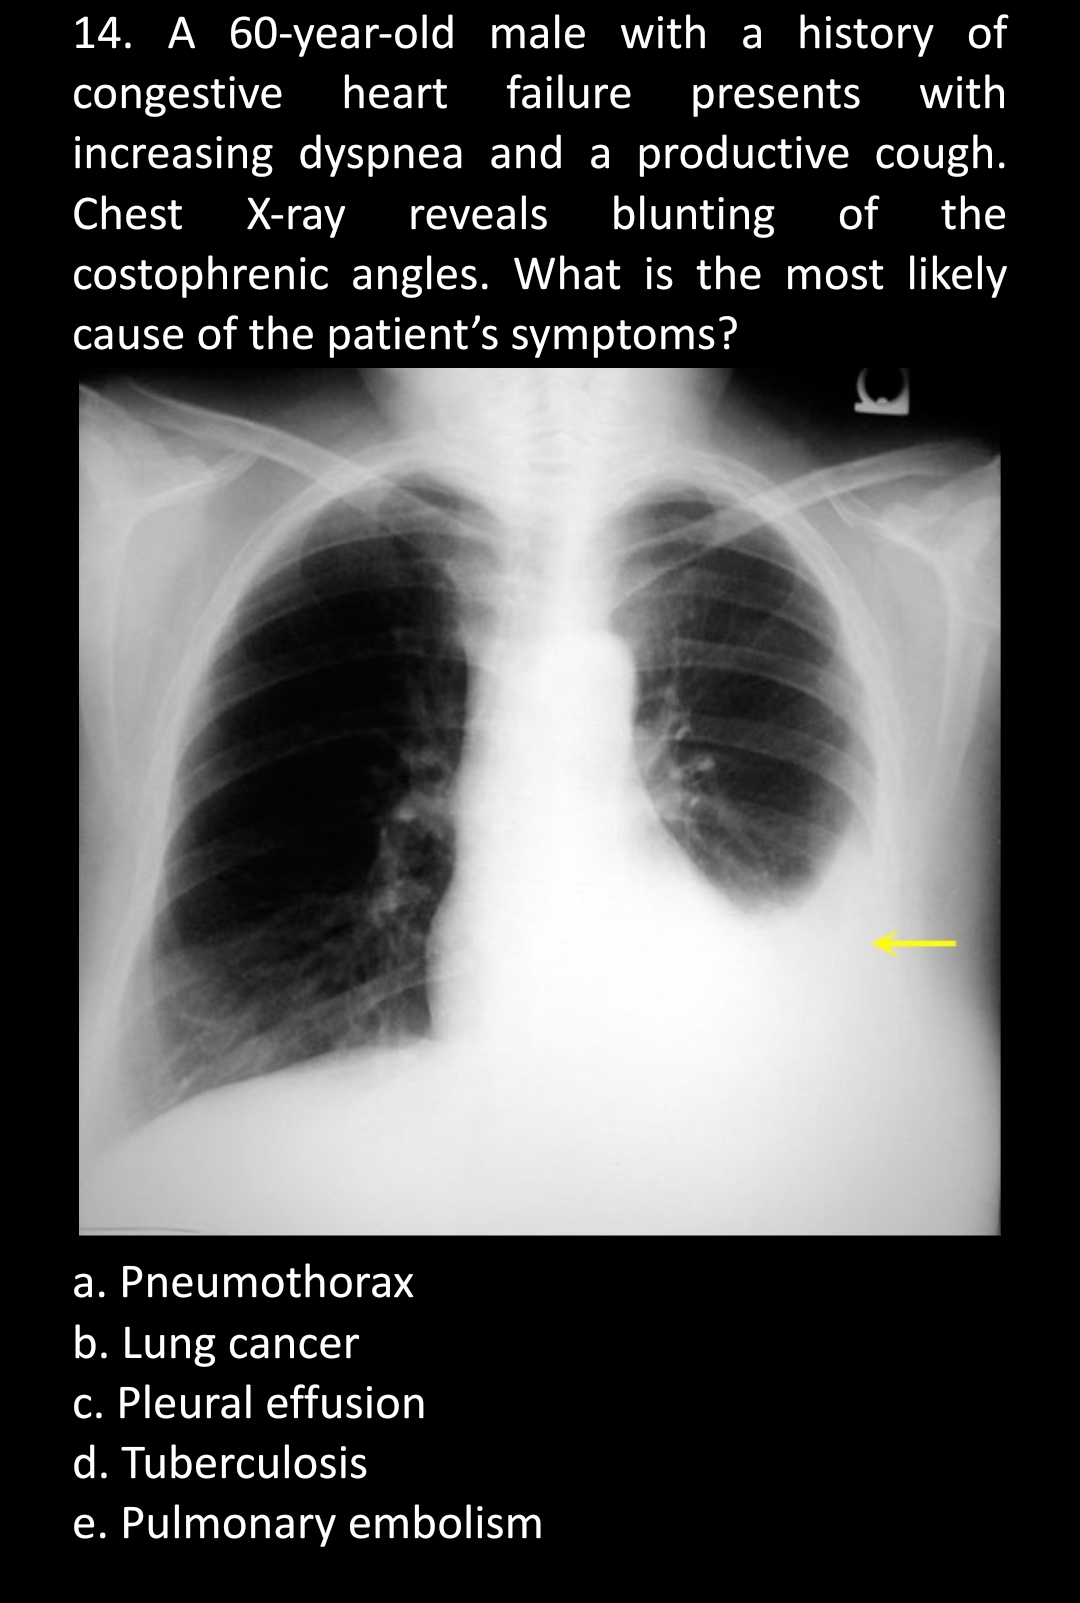 14. A 60-year-old male with a history of
congestive heart failure presents with
increasing dyspnea and a productive cough.
Chest X-ray reveals blunting of the
costophrenic angles. What is the most likely
cause of the patient's symptoms?
a. Pneumothorax
b. Lung cancer
c. Pleural effusion
d. Tuberculosis
e. Pulmonary embolism